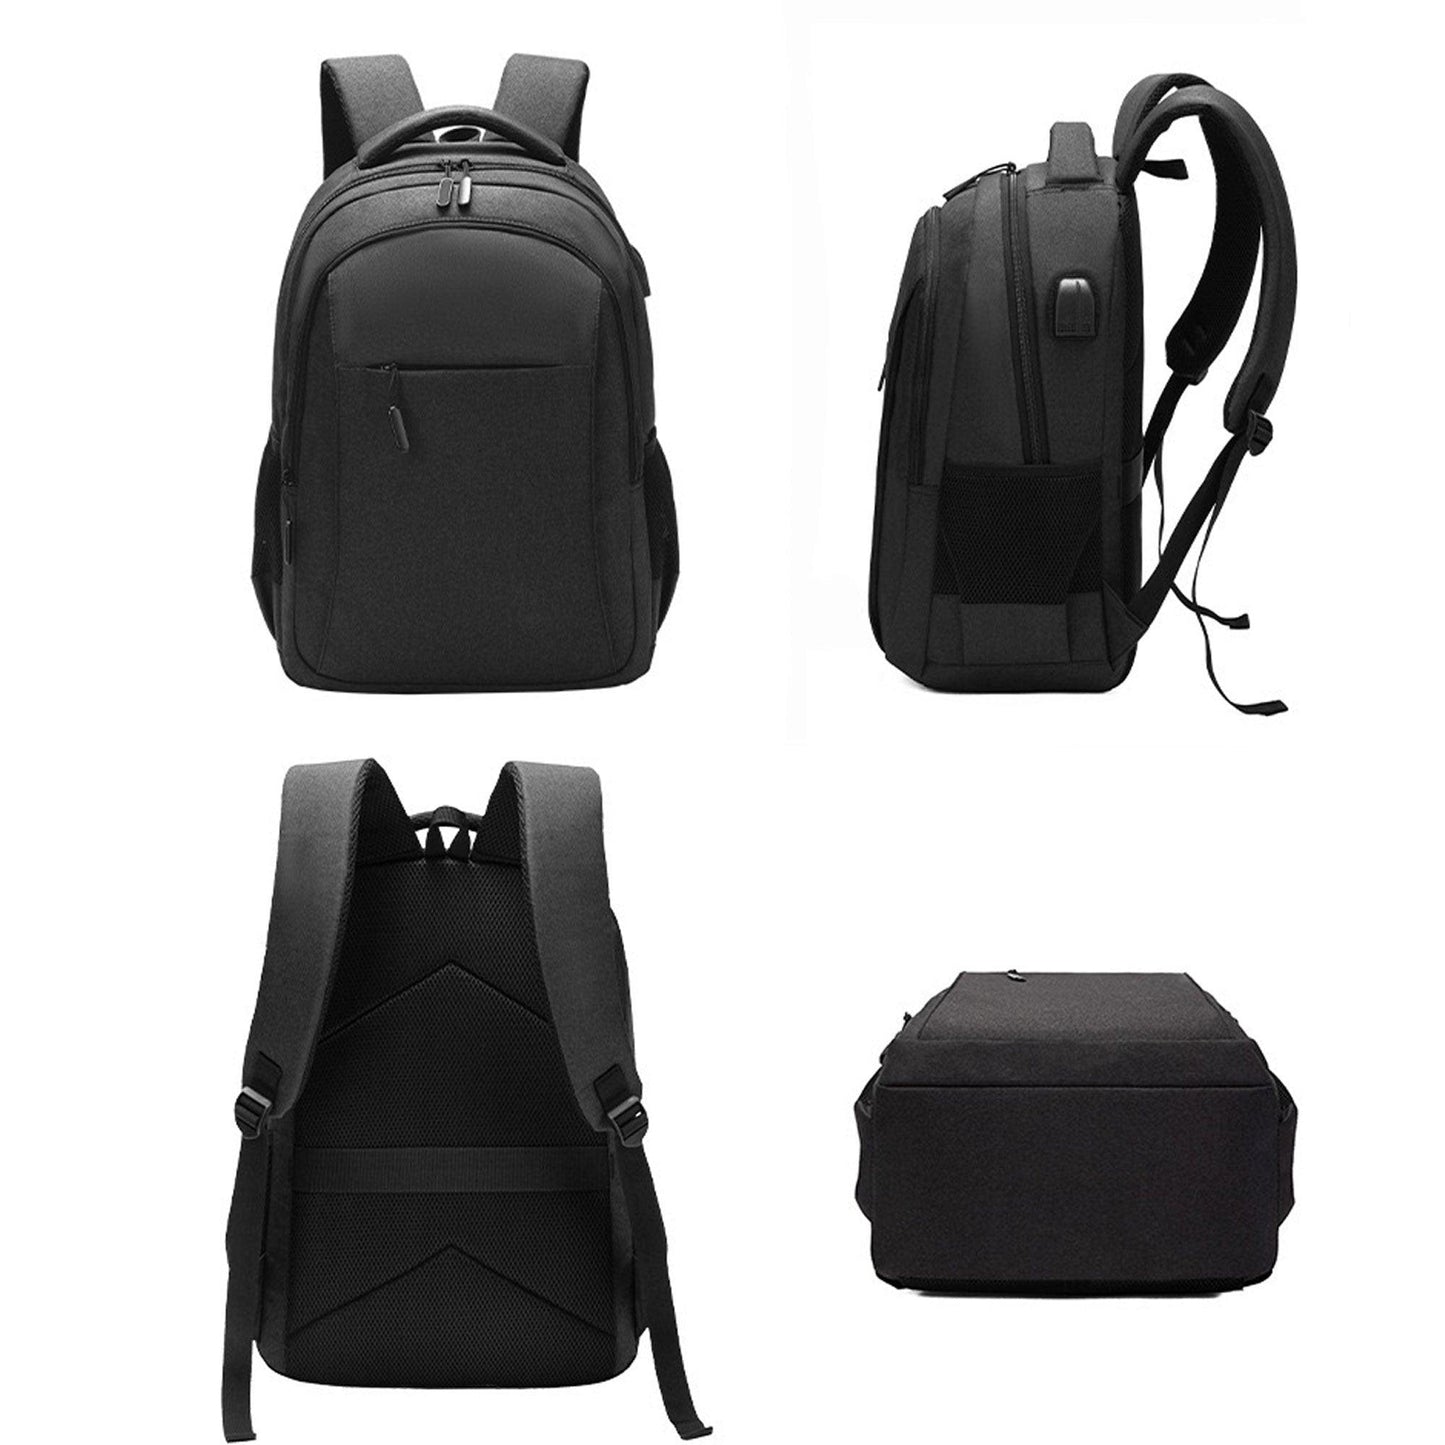 Drake Backpack - San Michelle Bags suitcase nz